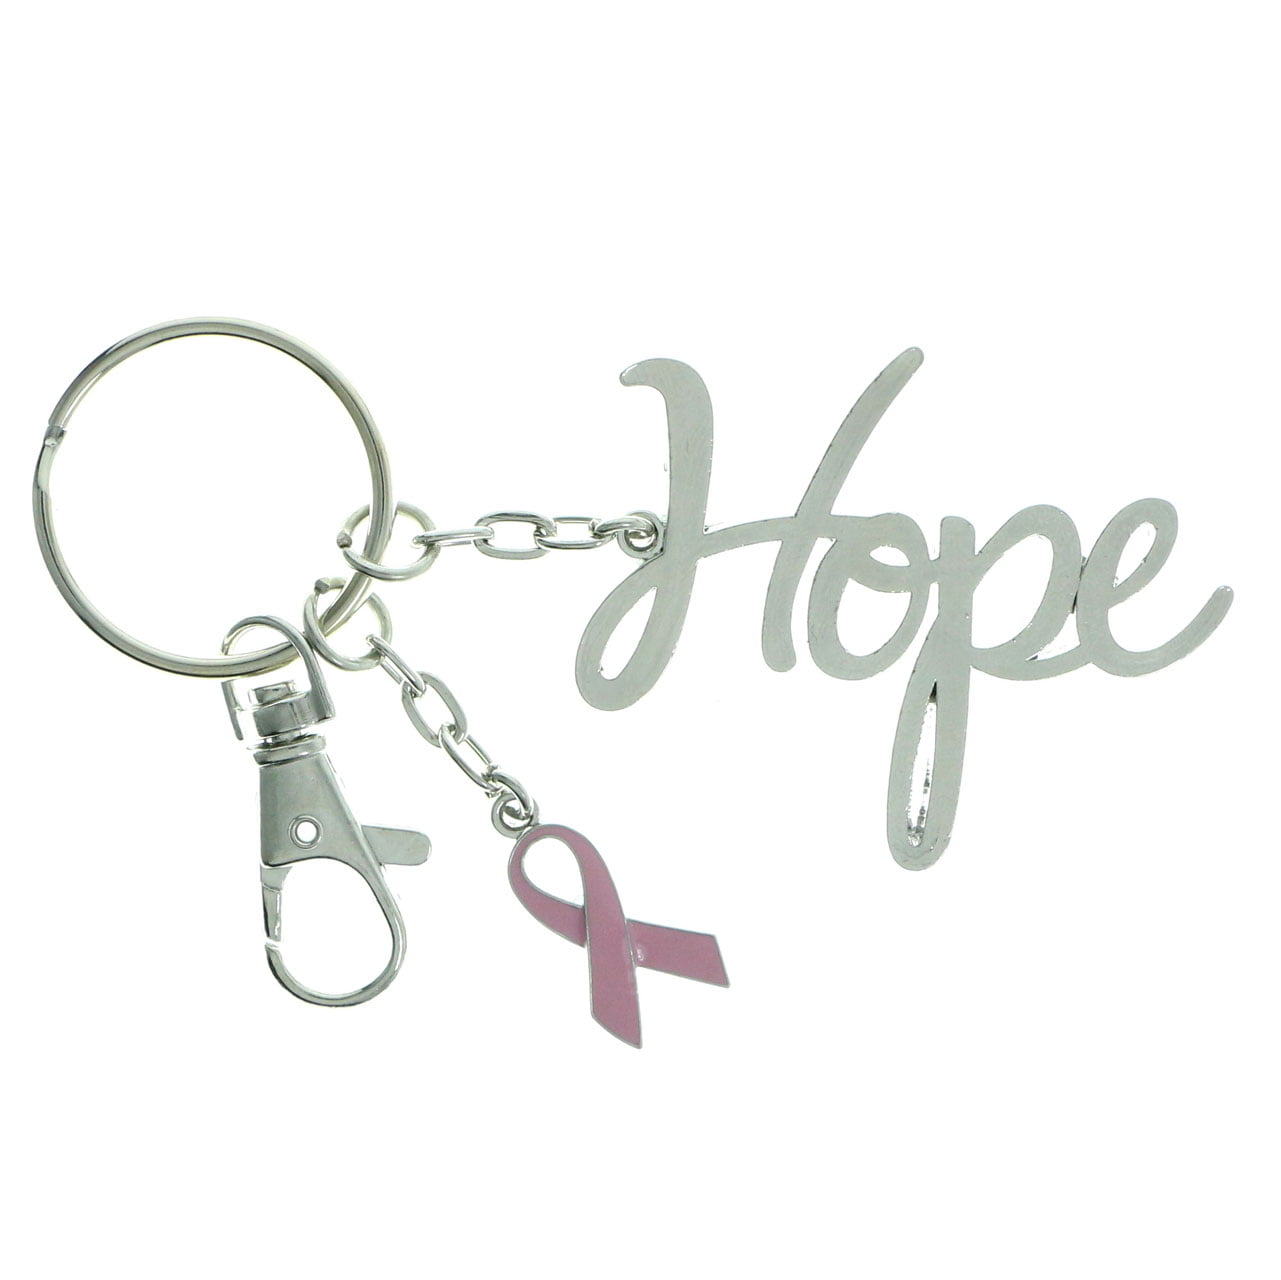 Hope BREAST CANCER SILVERTONE HOPE RIBBON CHARM & LOBSTER CLASP ATTACH TO ANYTHING 